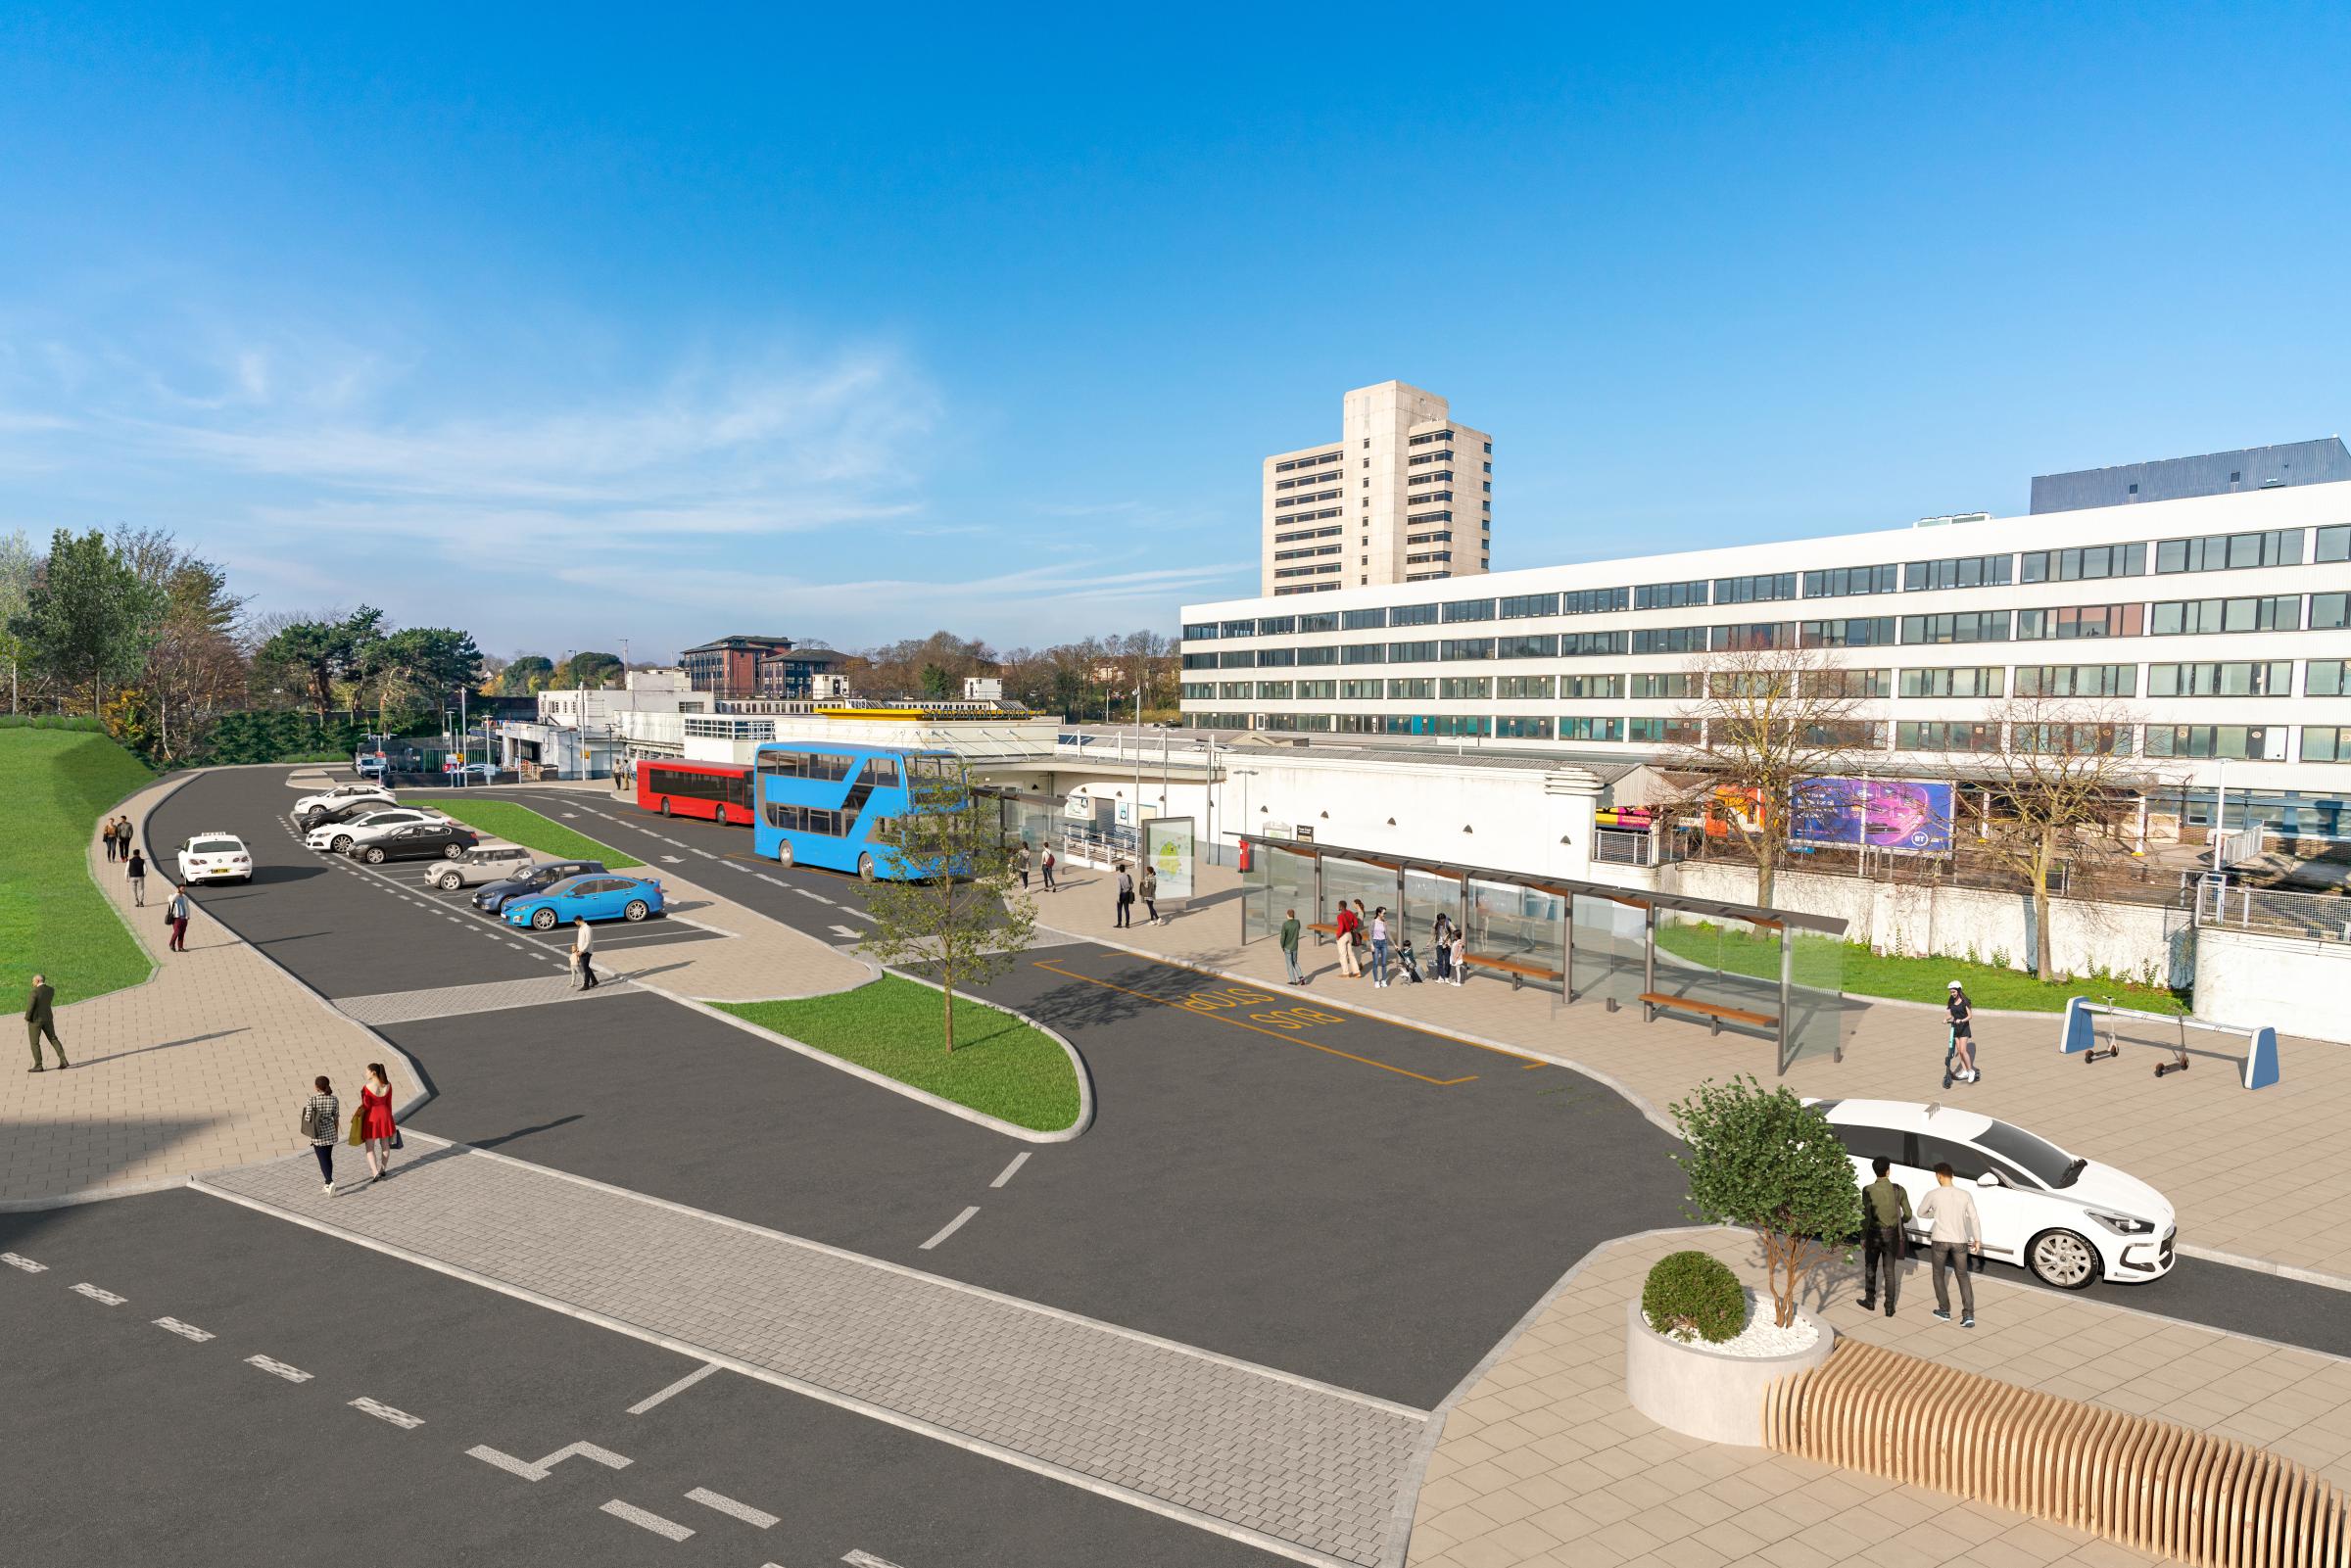 Another area that will benefit will be Southampton central station